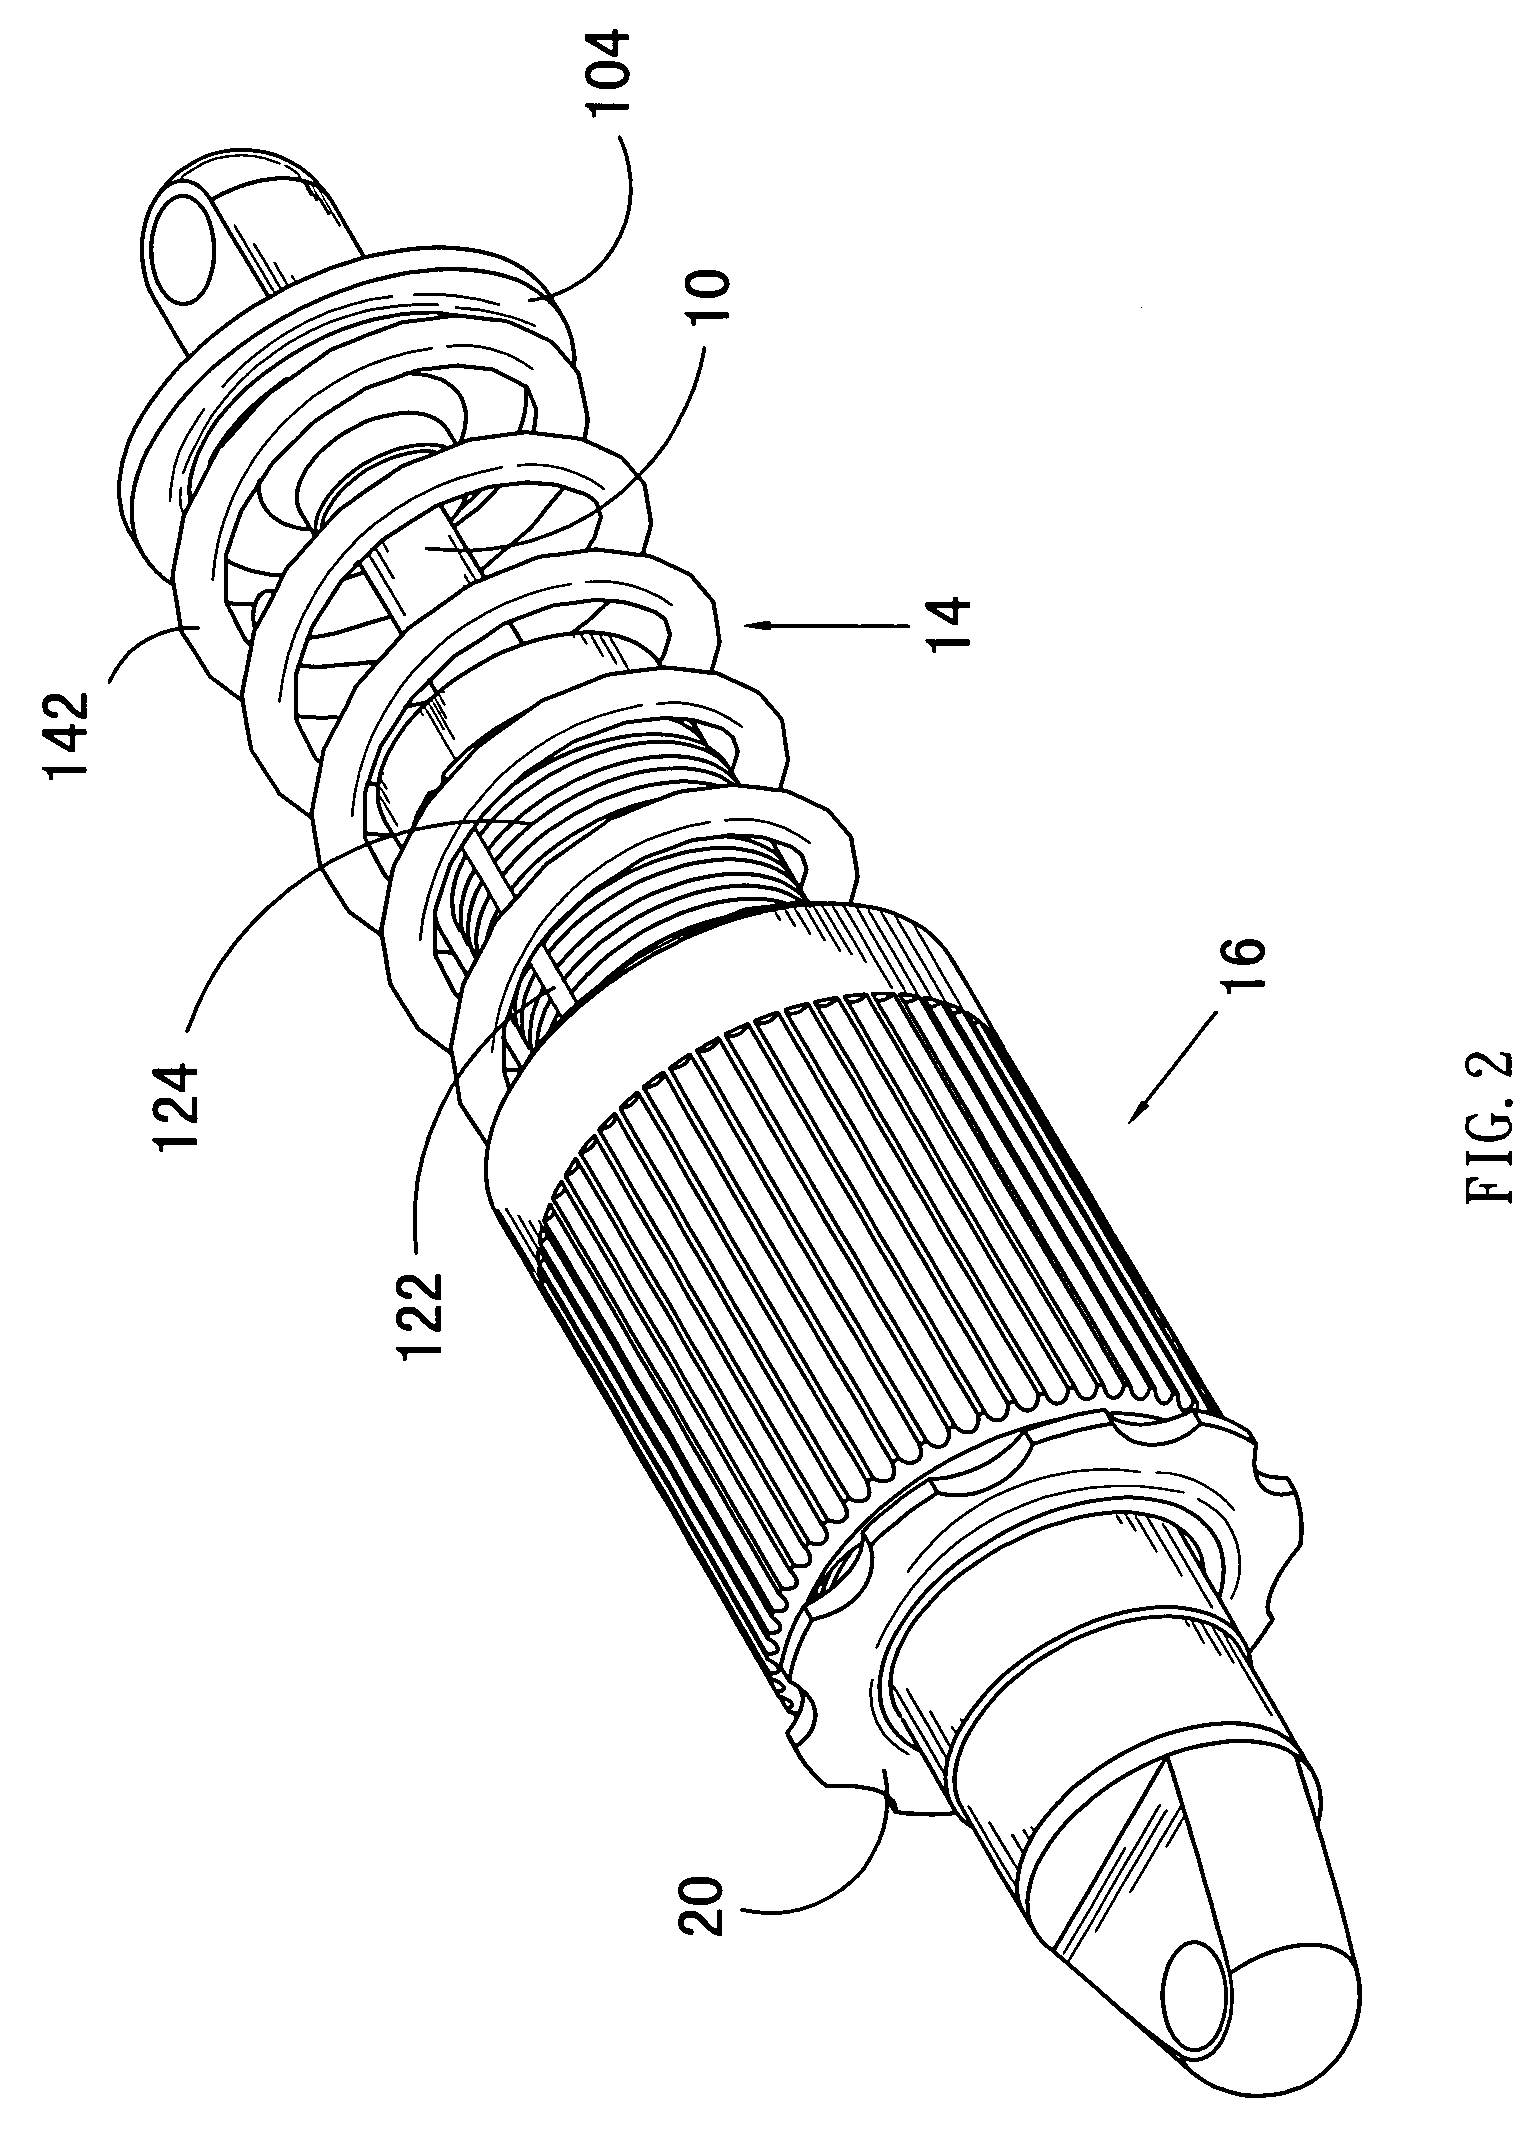 Adjusting mechanism with a helical spring of large diameter